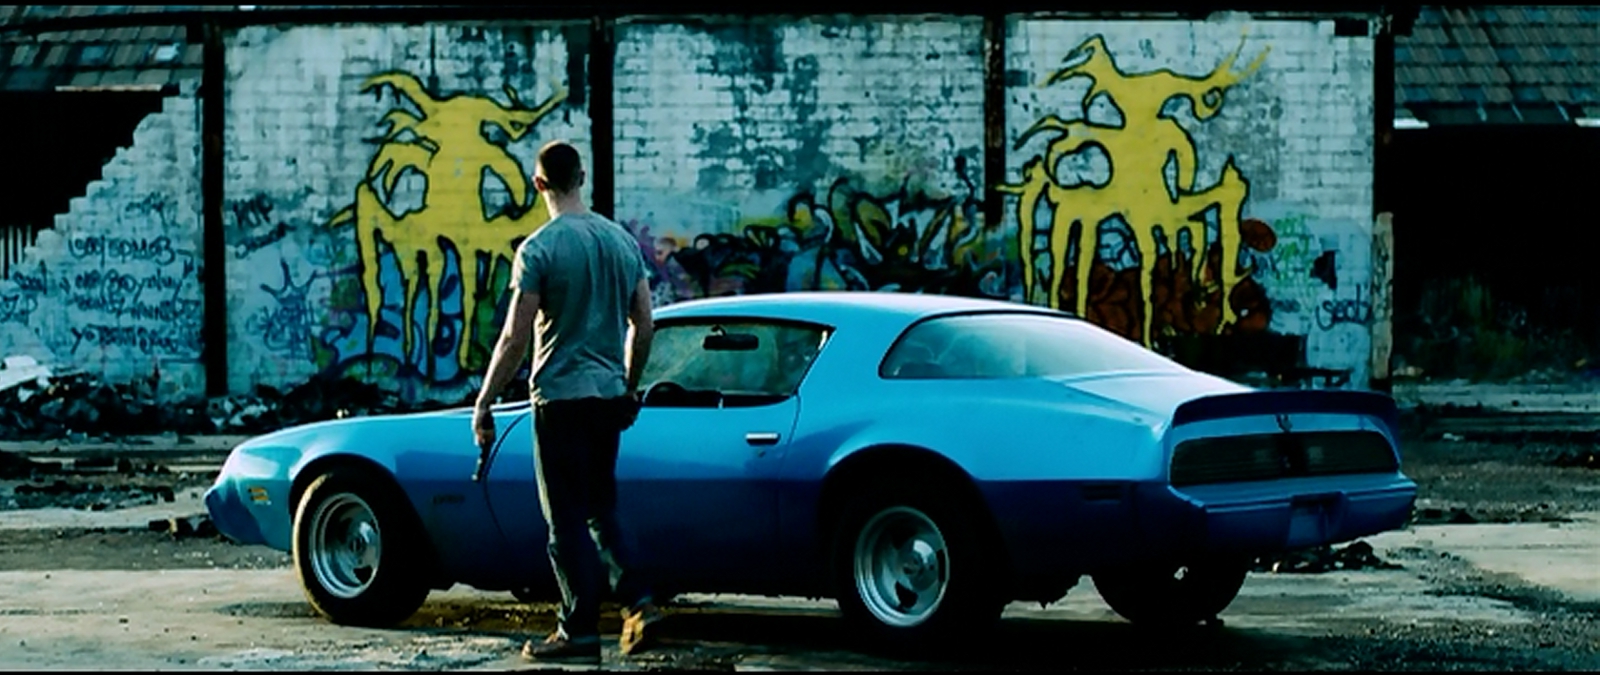 Guns, ruins, and a muscle car: the most Detroit picture you will ever see outside of Robocop.